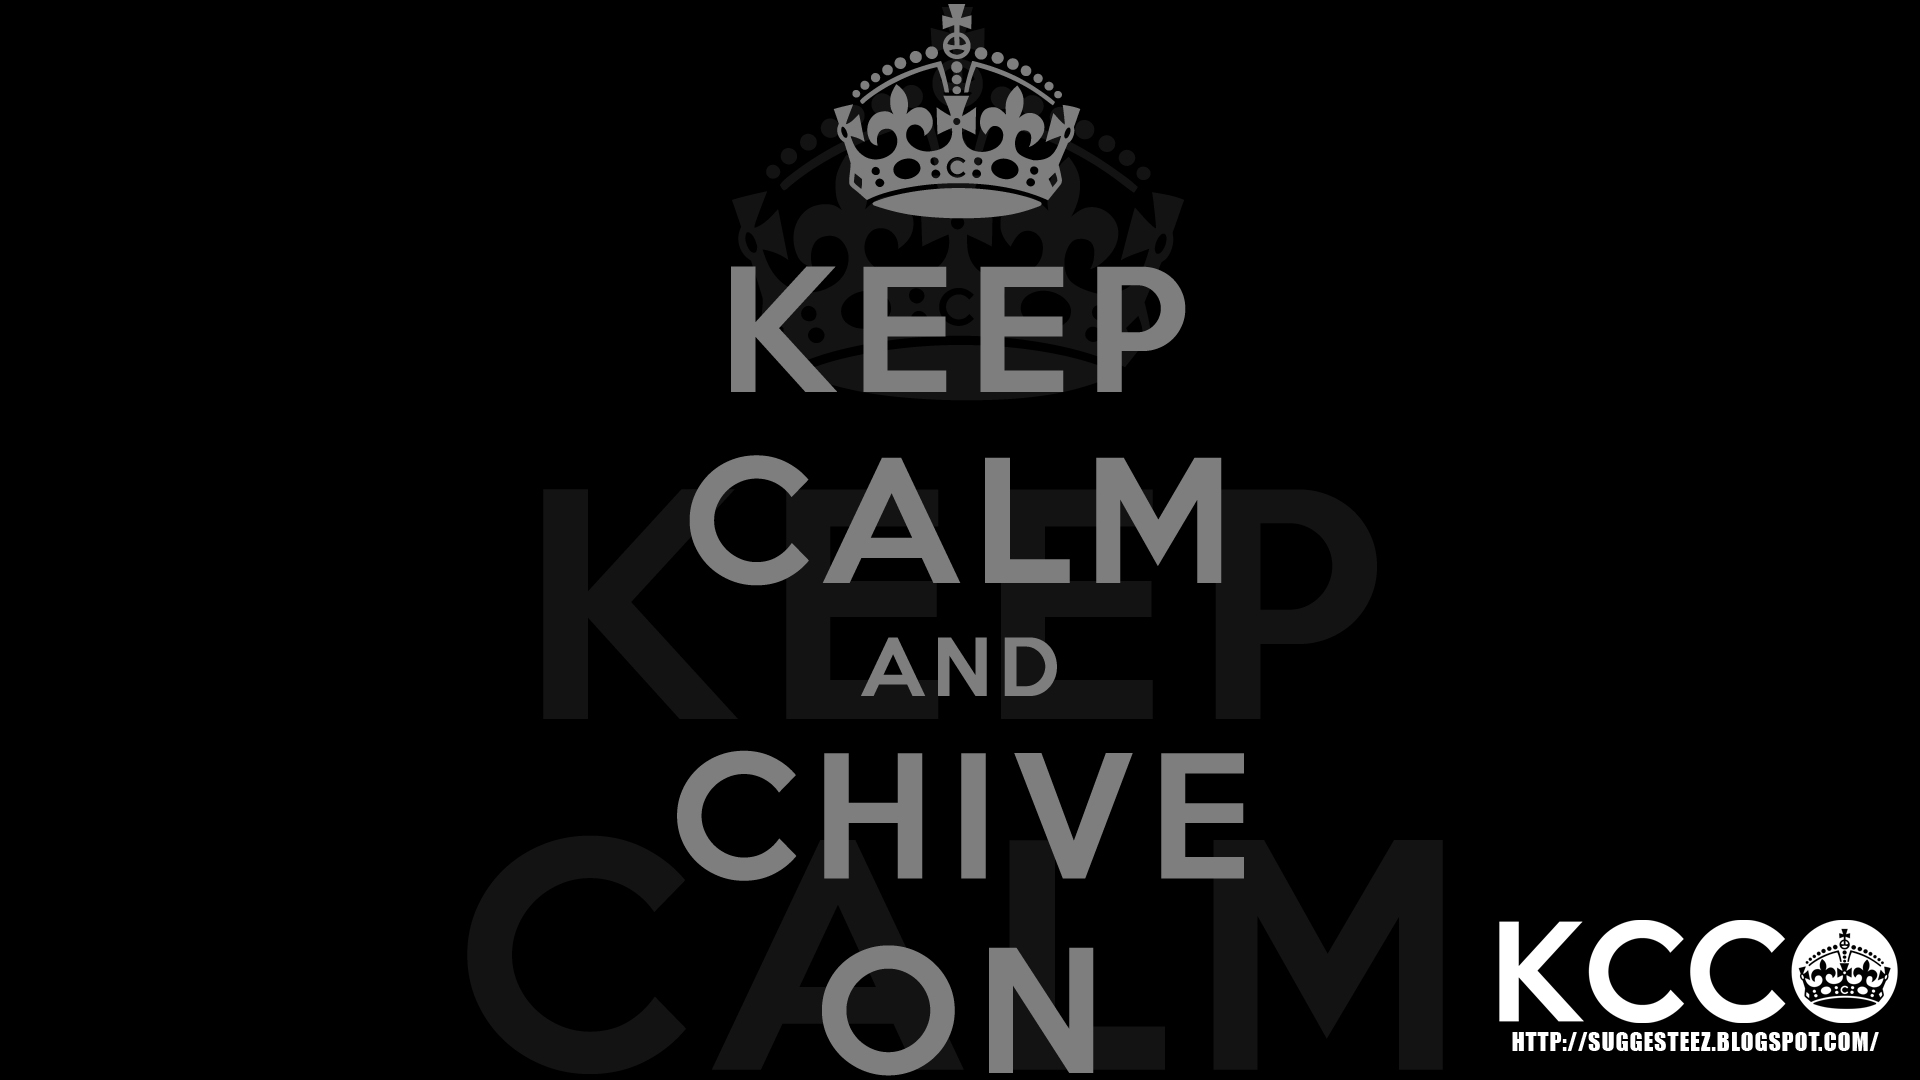 Thechive HD Black Wallpaper By Suggesteez